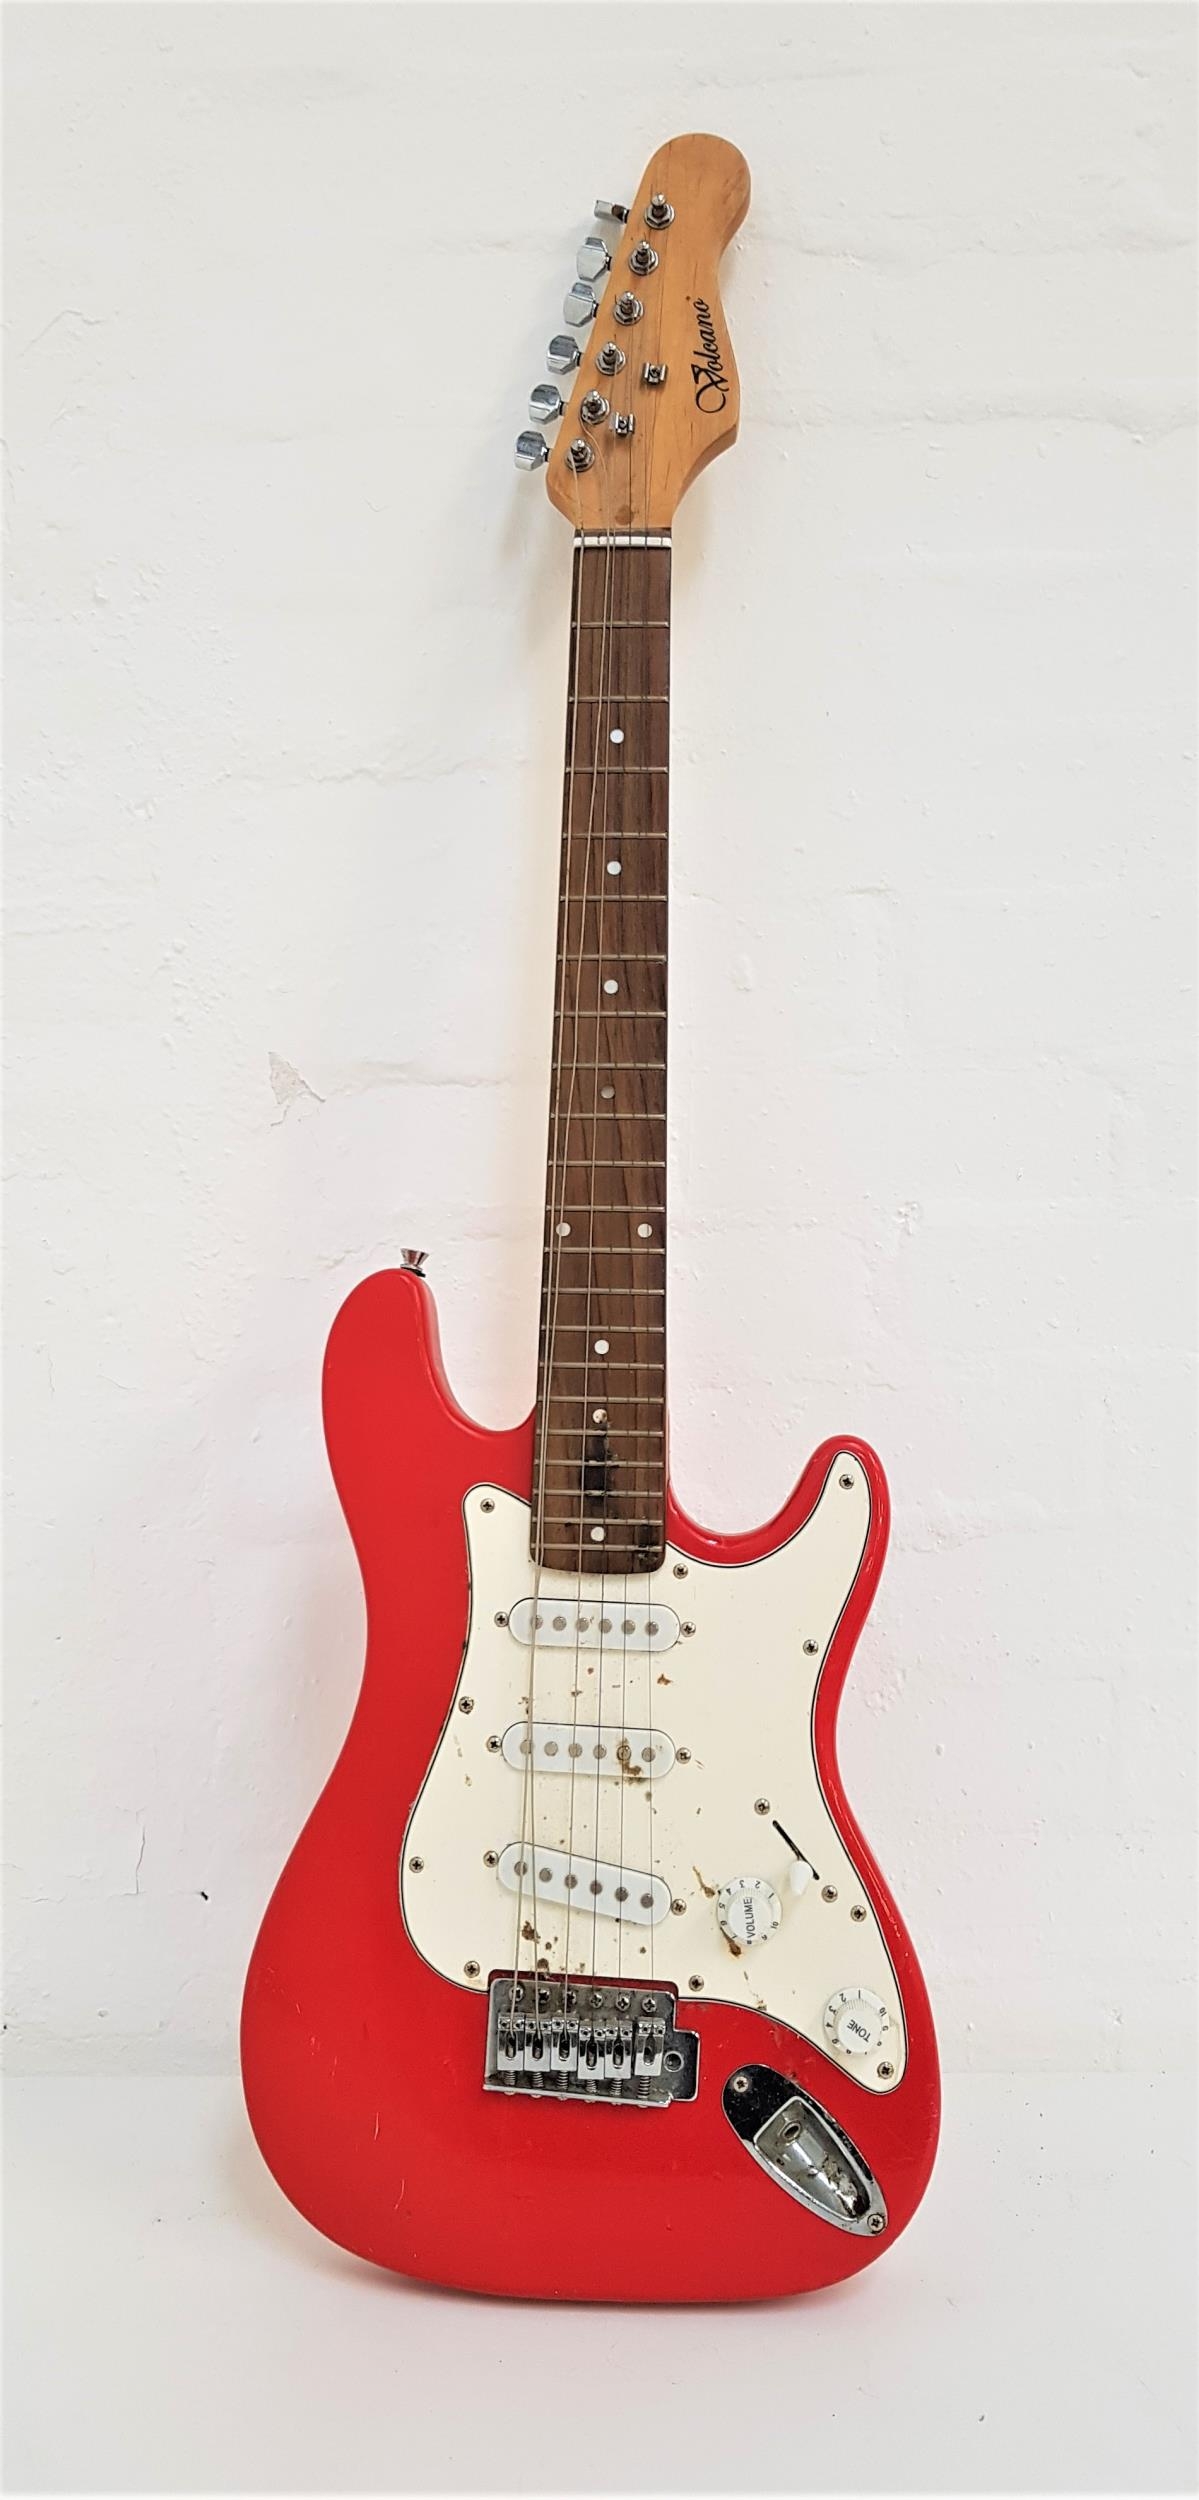 VOLCANO CHILDS ELECTRIC GUITAR with a red gloss body